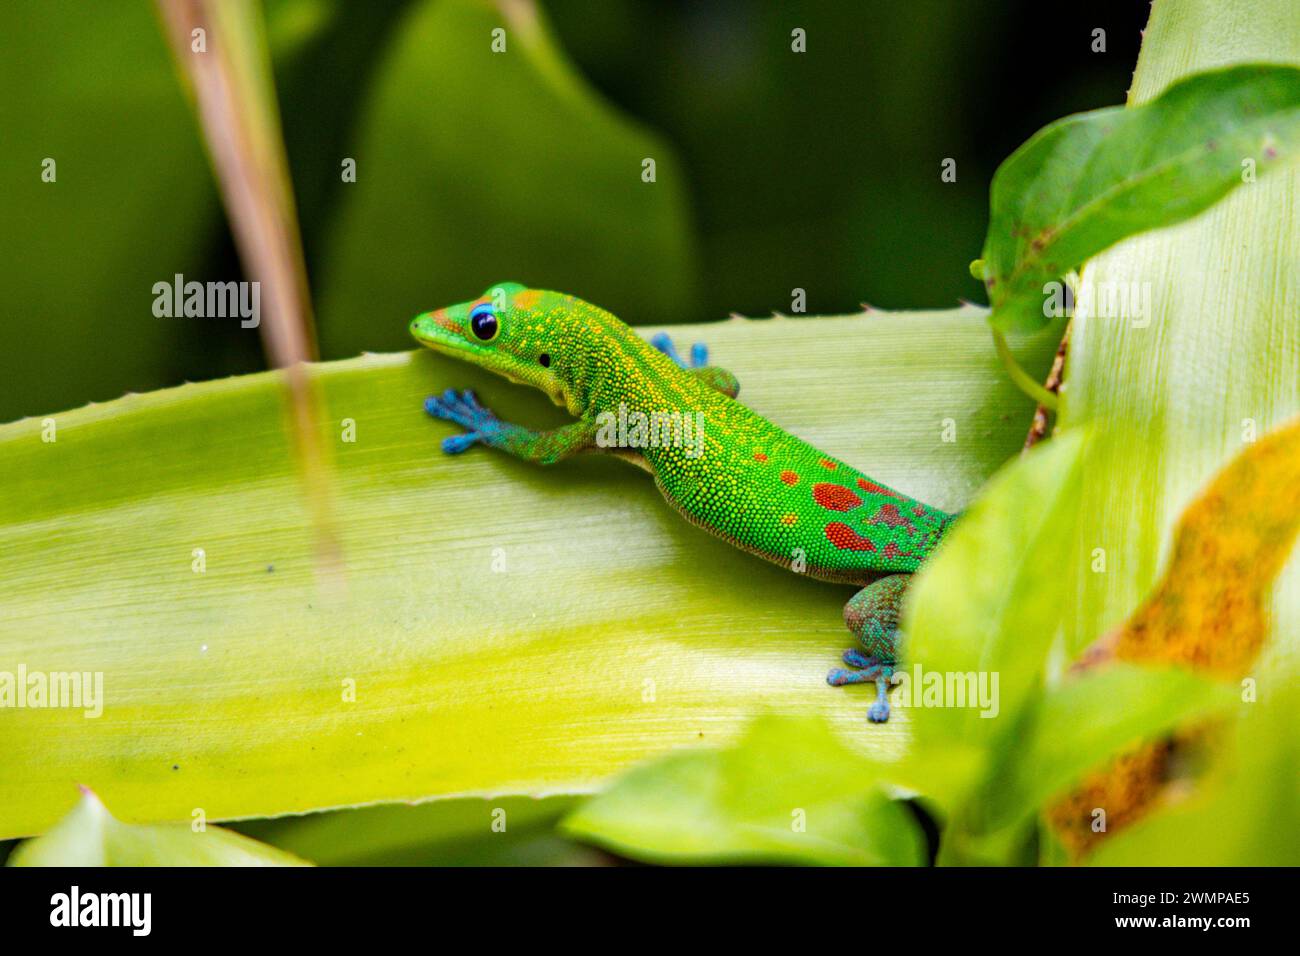 Gold dust day gecko (Phelsuma laticauda). This lizard is native to Madagascar but has been introduced to various Pacific islands. Photographed in Big Stock Photo